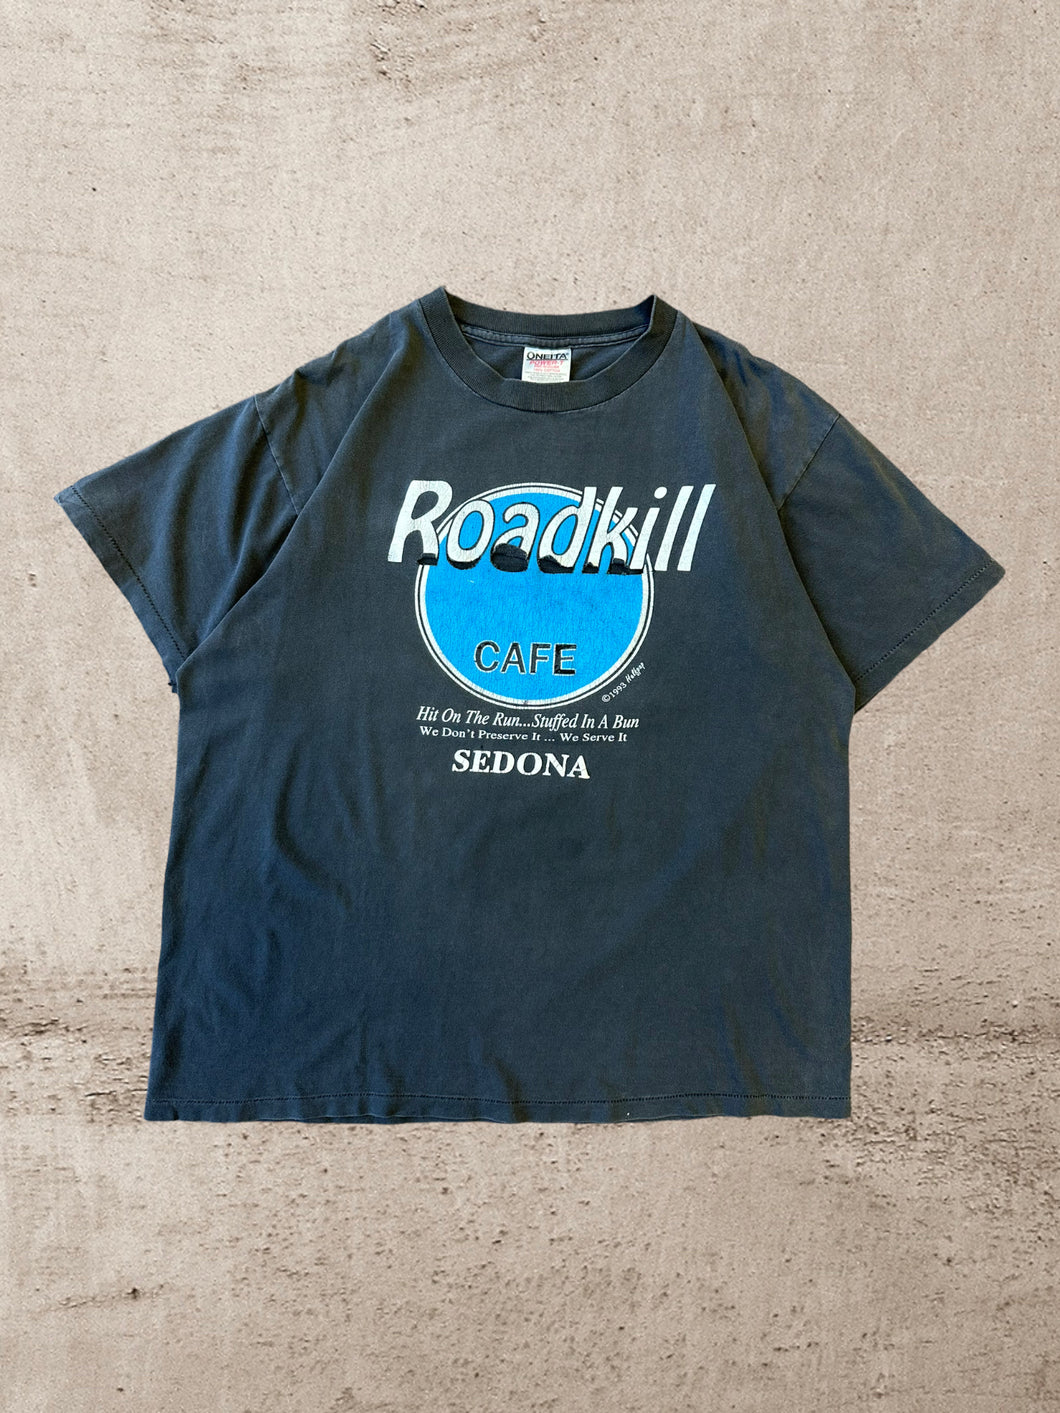 1993 Roadkill Cafe Distressed T-Shirt - Large